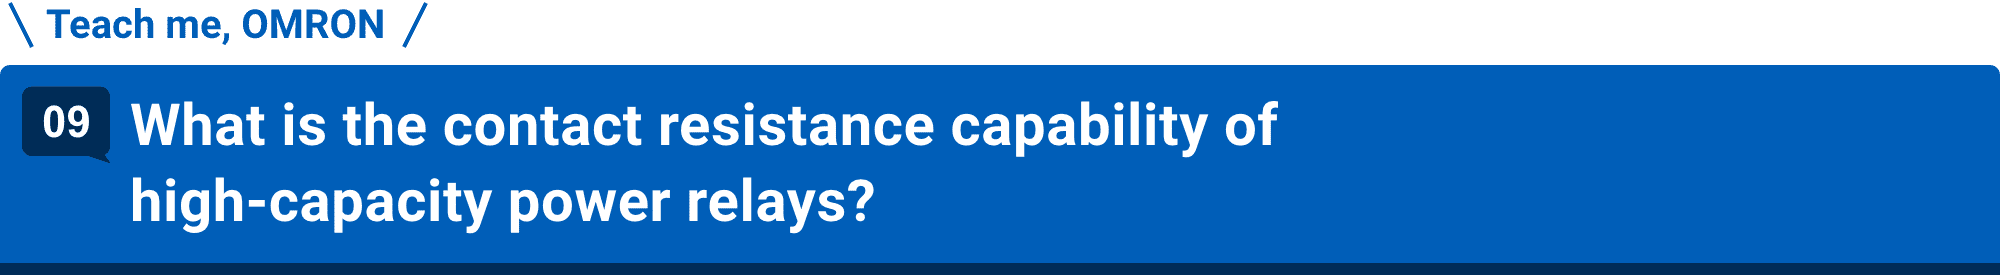 Teach me, OMRON 09.What is the contact resistance capability of high-capacity power relays?